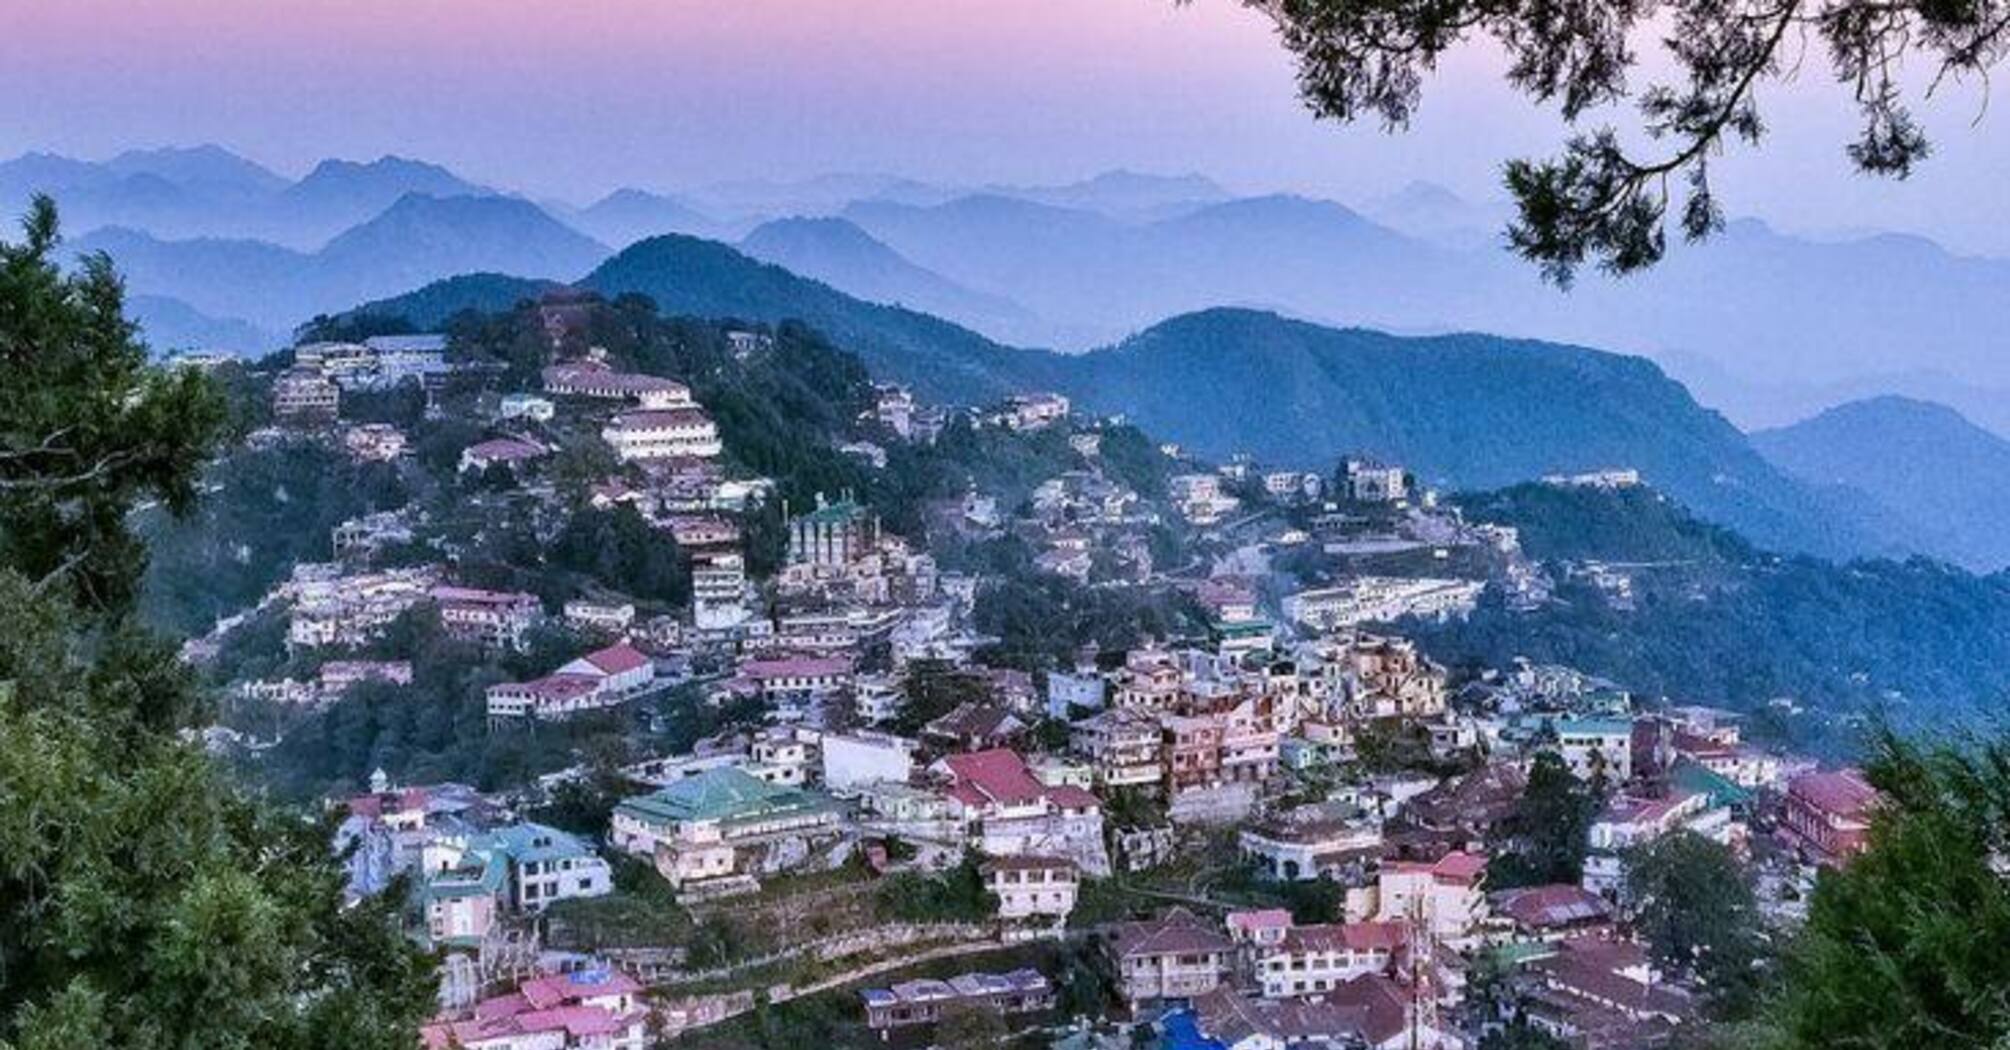 Exploring the Camel Road in Mussoorie: 5 things to know